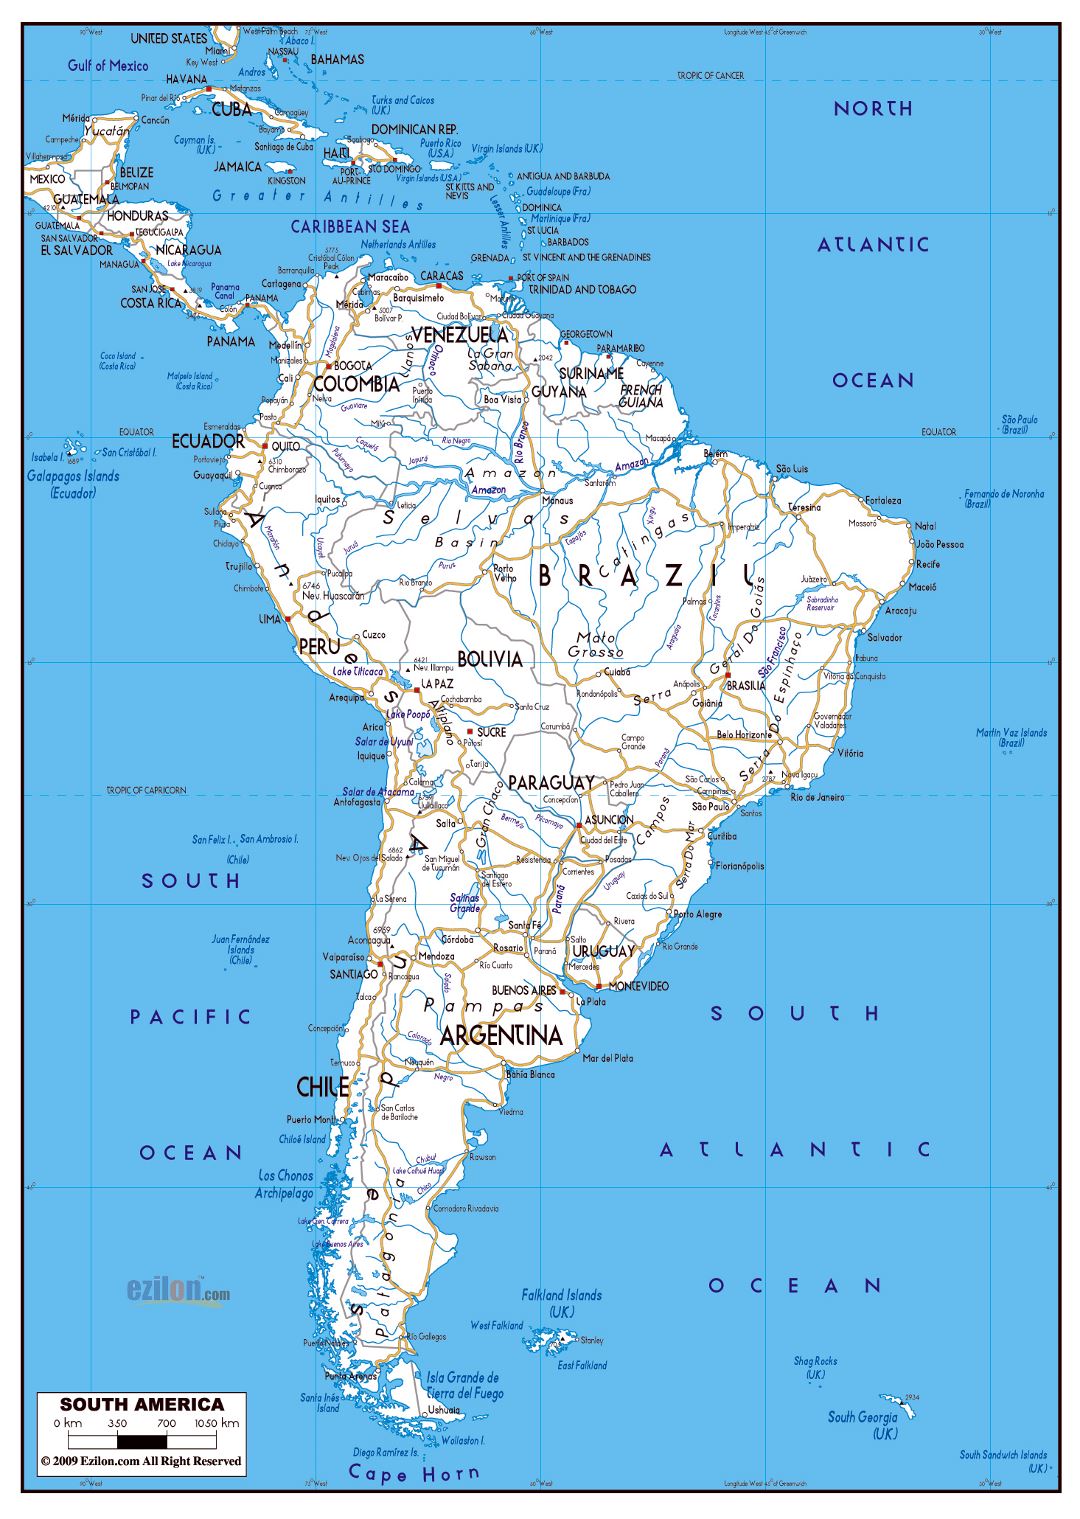 Large road map of South America with major cities